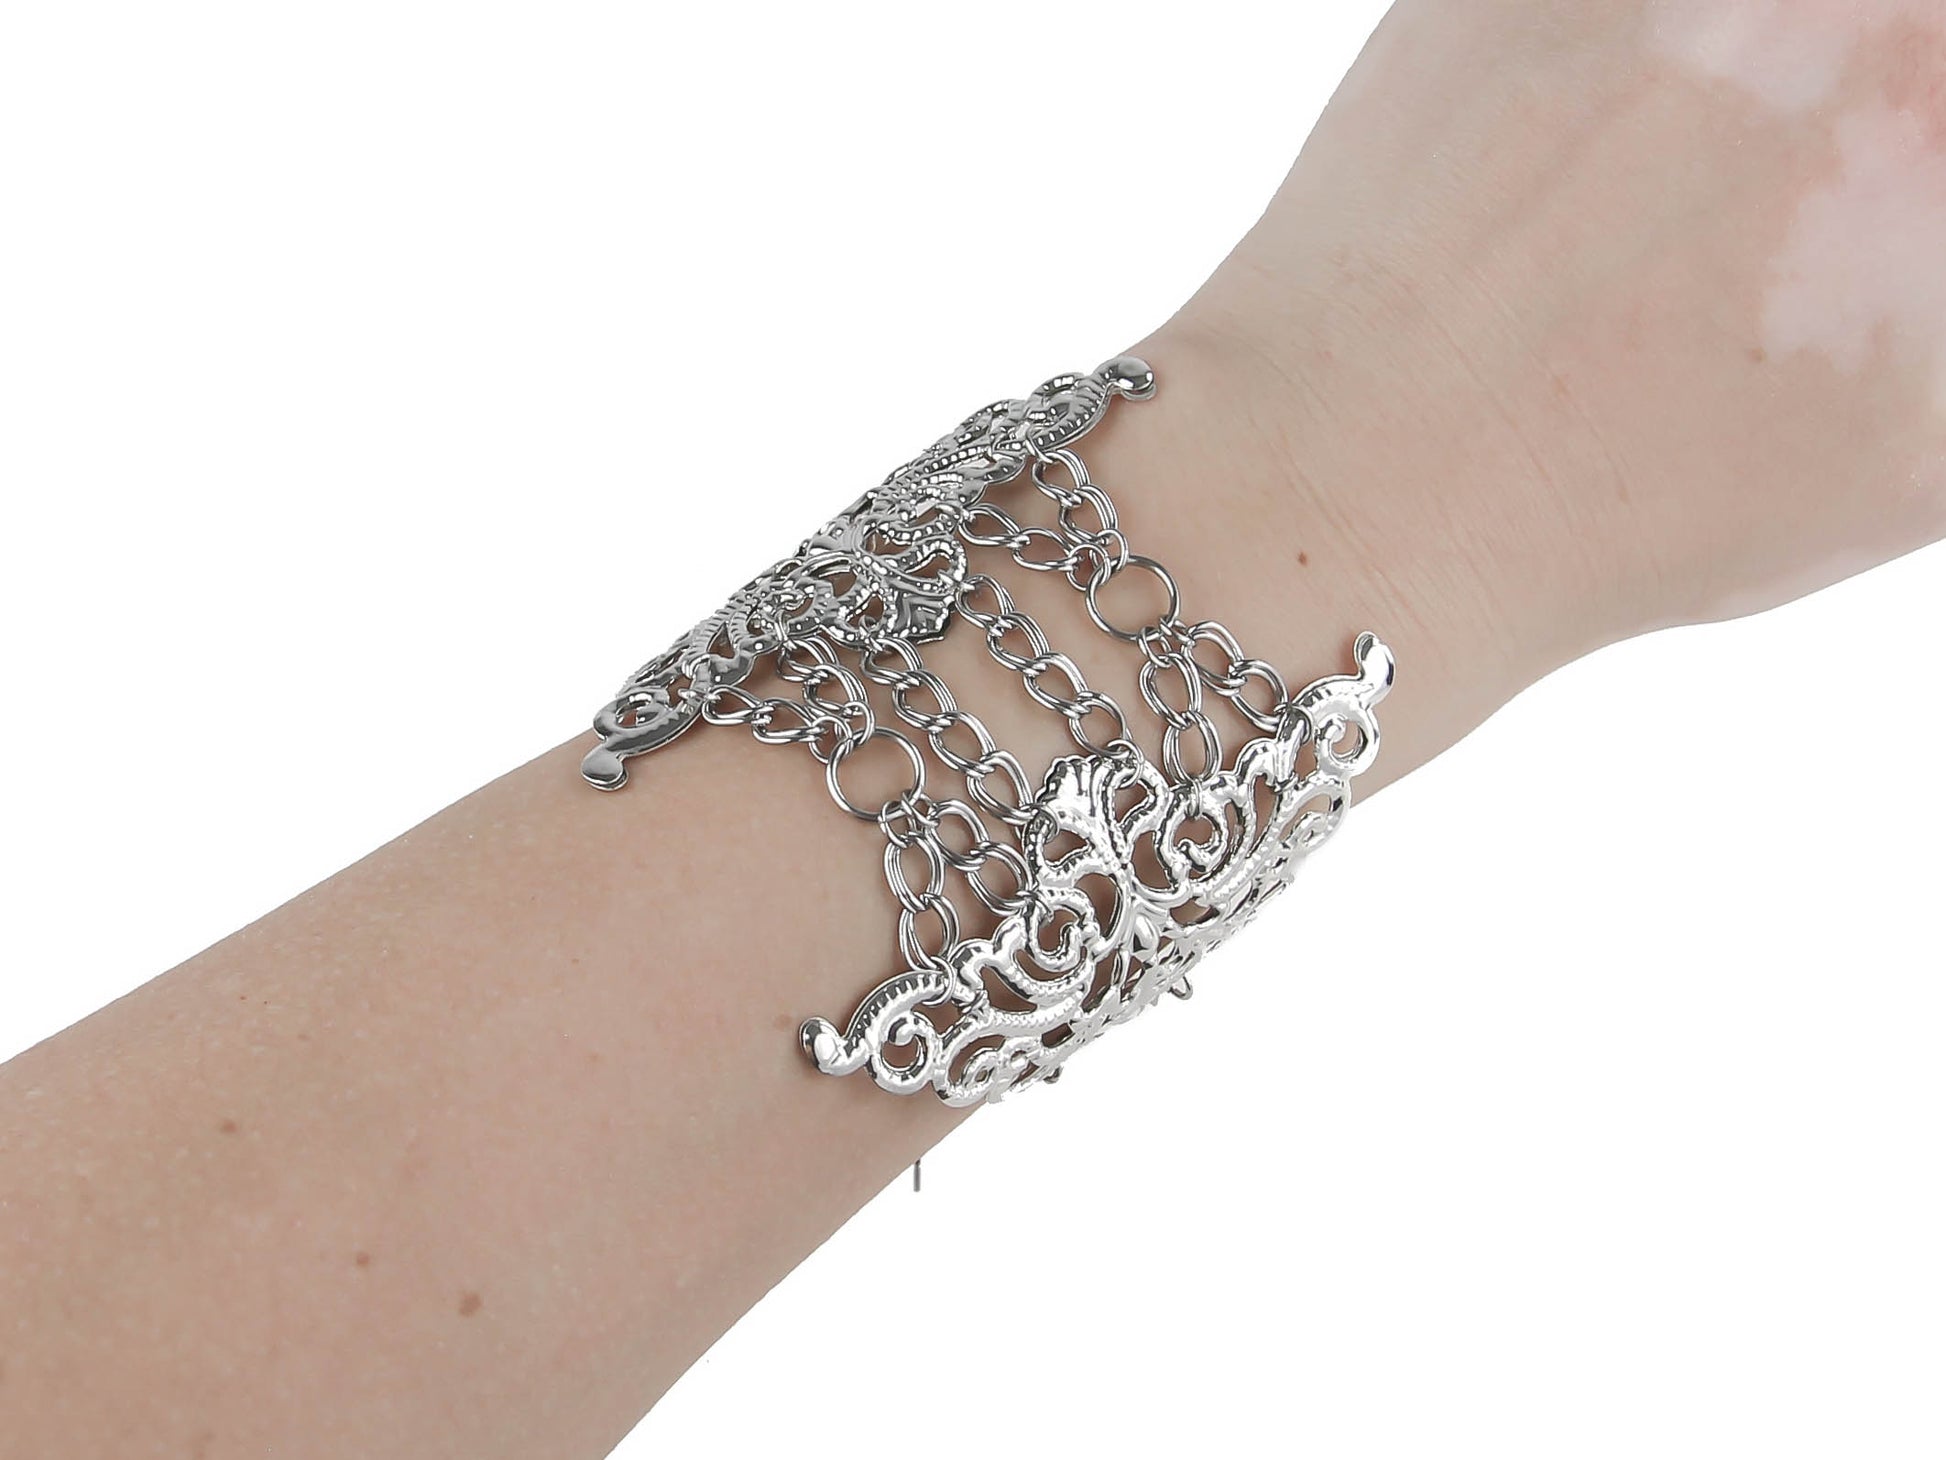 A detailed view of a Myril Jewels gothic bracelet, featuring elaborate silver filigree patterns linked to chains, draping elegantly over a slender wrist. This accessory is perfect for adding a touch of neo-goth drama and sophistication to any outfit, suitable for those who cherish gothic-chic, Witchcore, or bold statement jewelry.